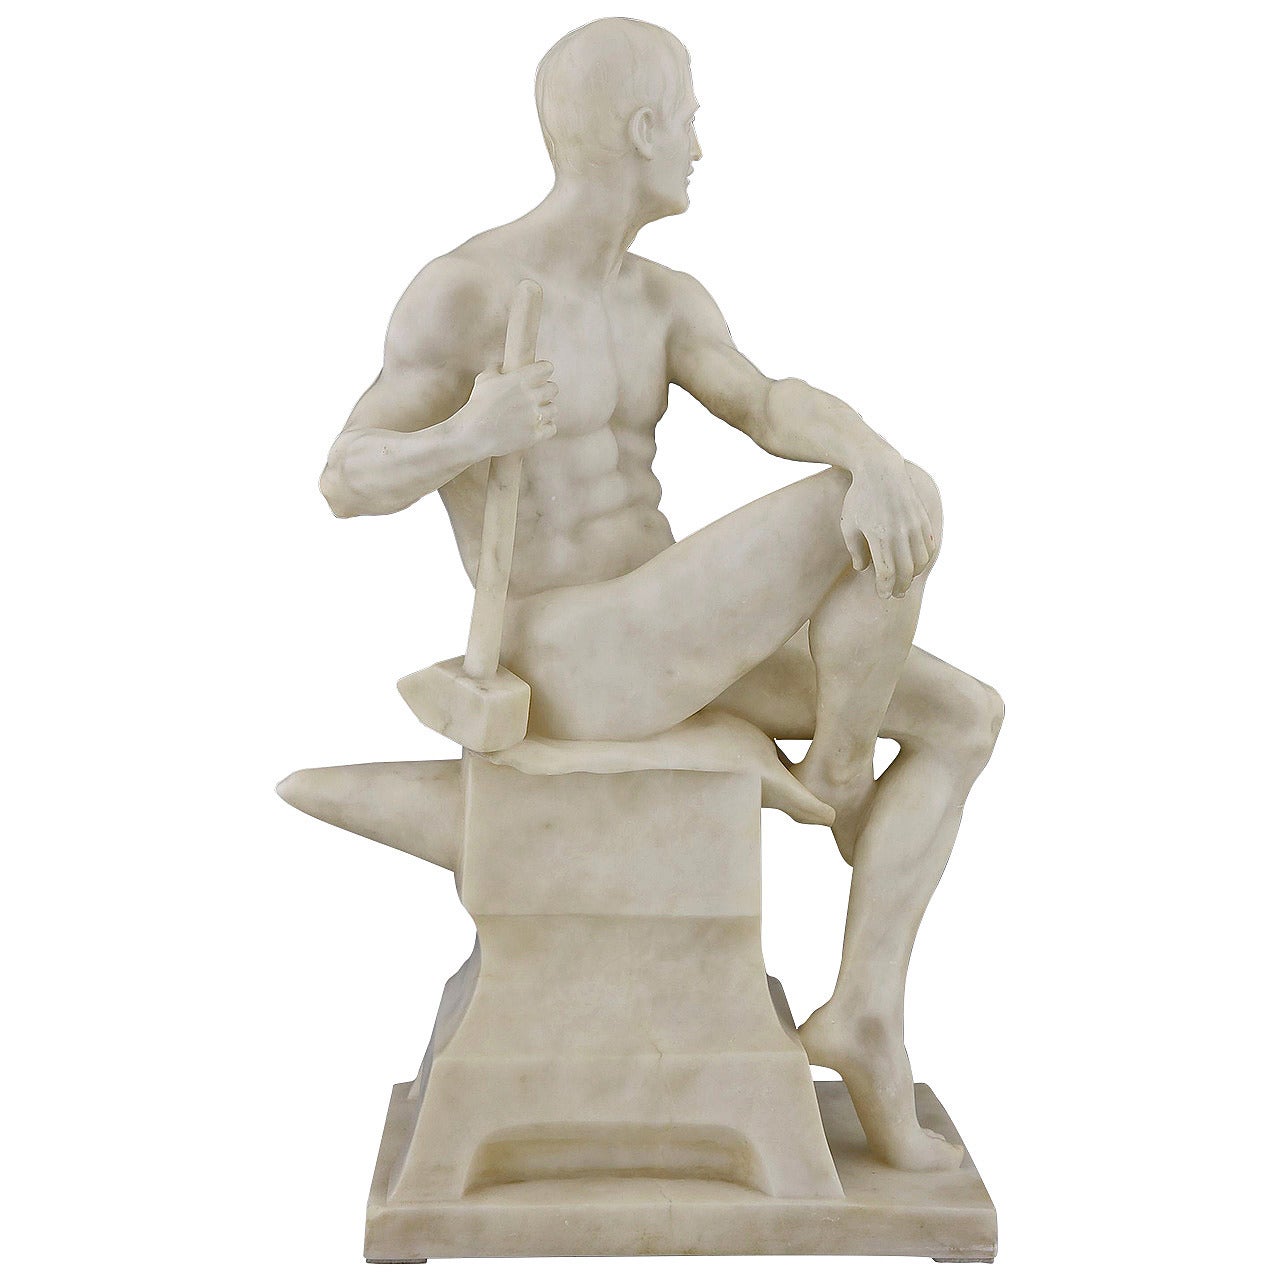 Antique Marble Sculpture of a Male Nude by Franz Iffland, 1890, Germany